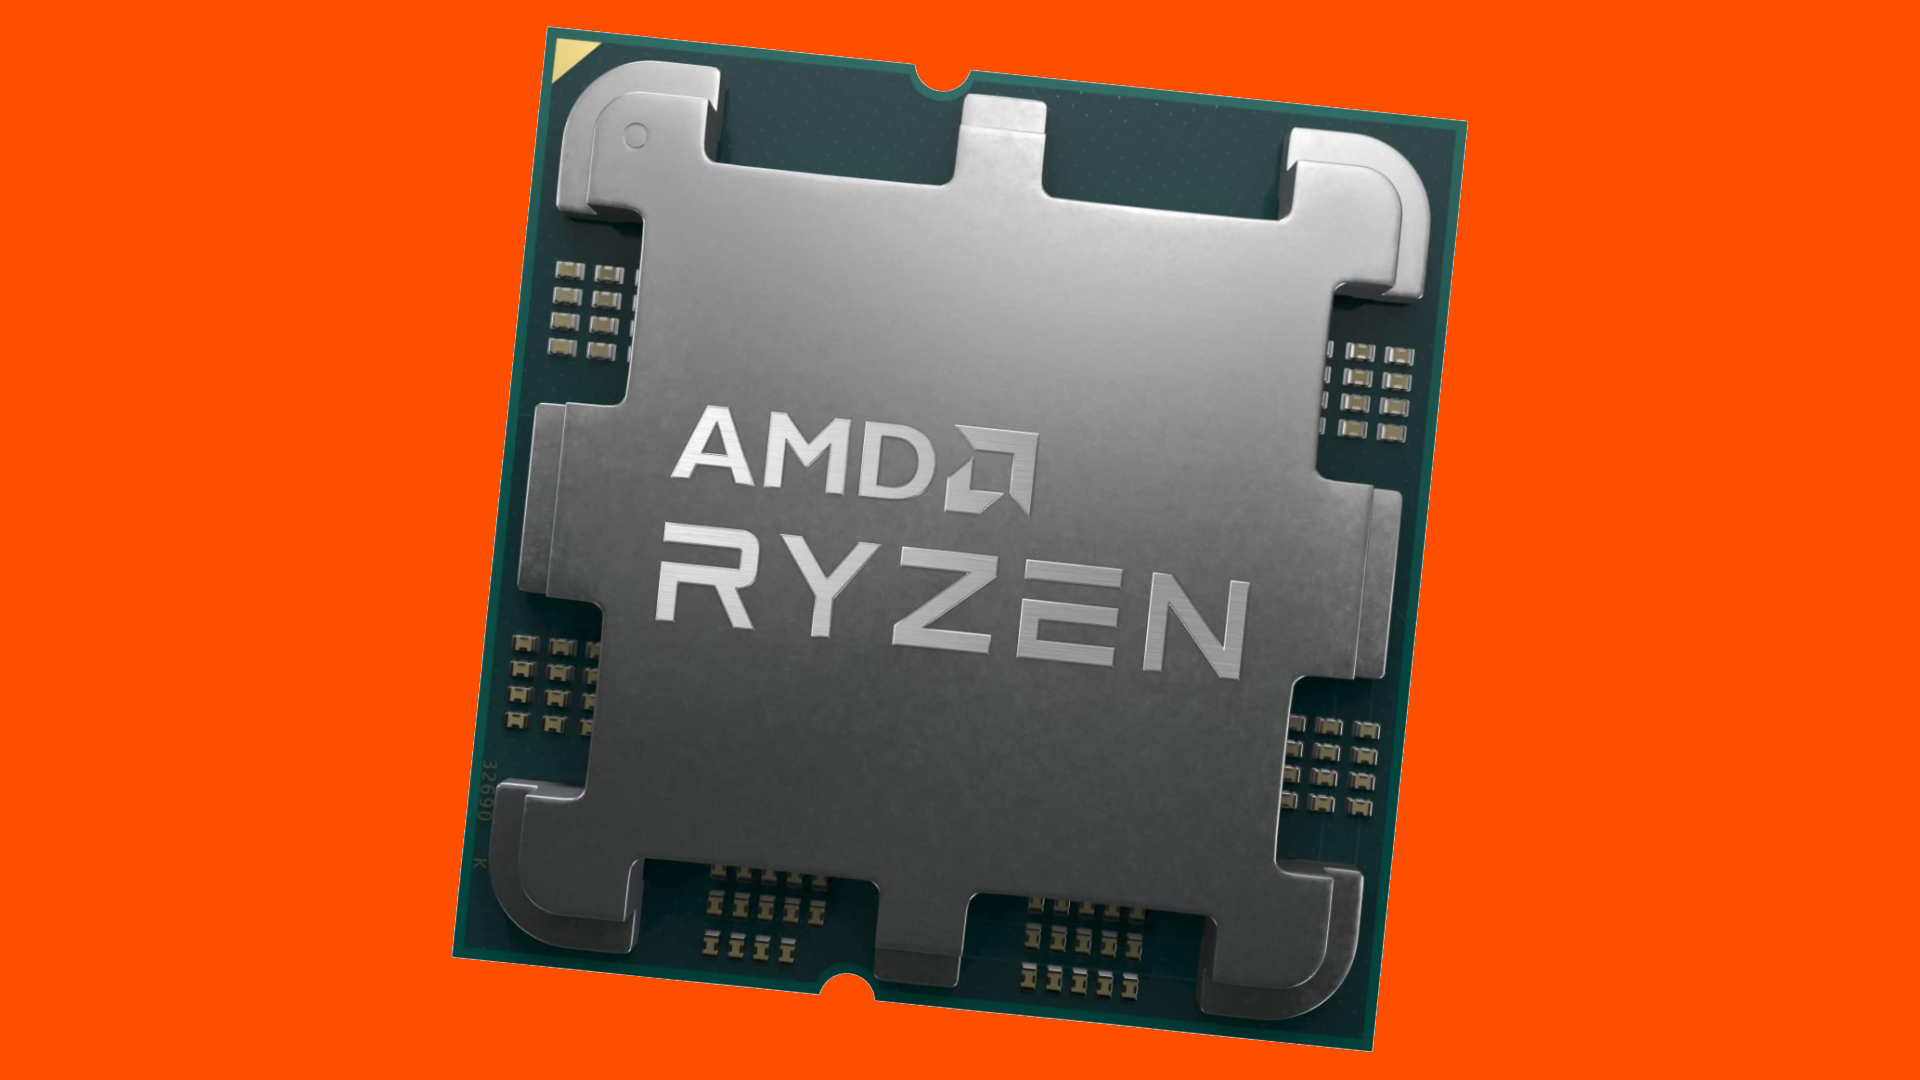 AMD Ryzen 9 CPUs hit historic low prices, so grab one while you can